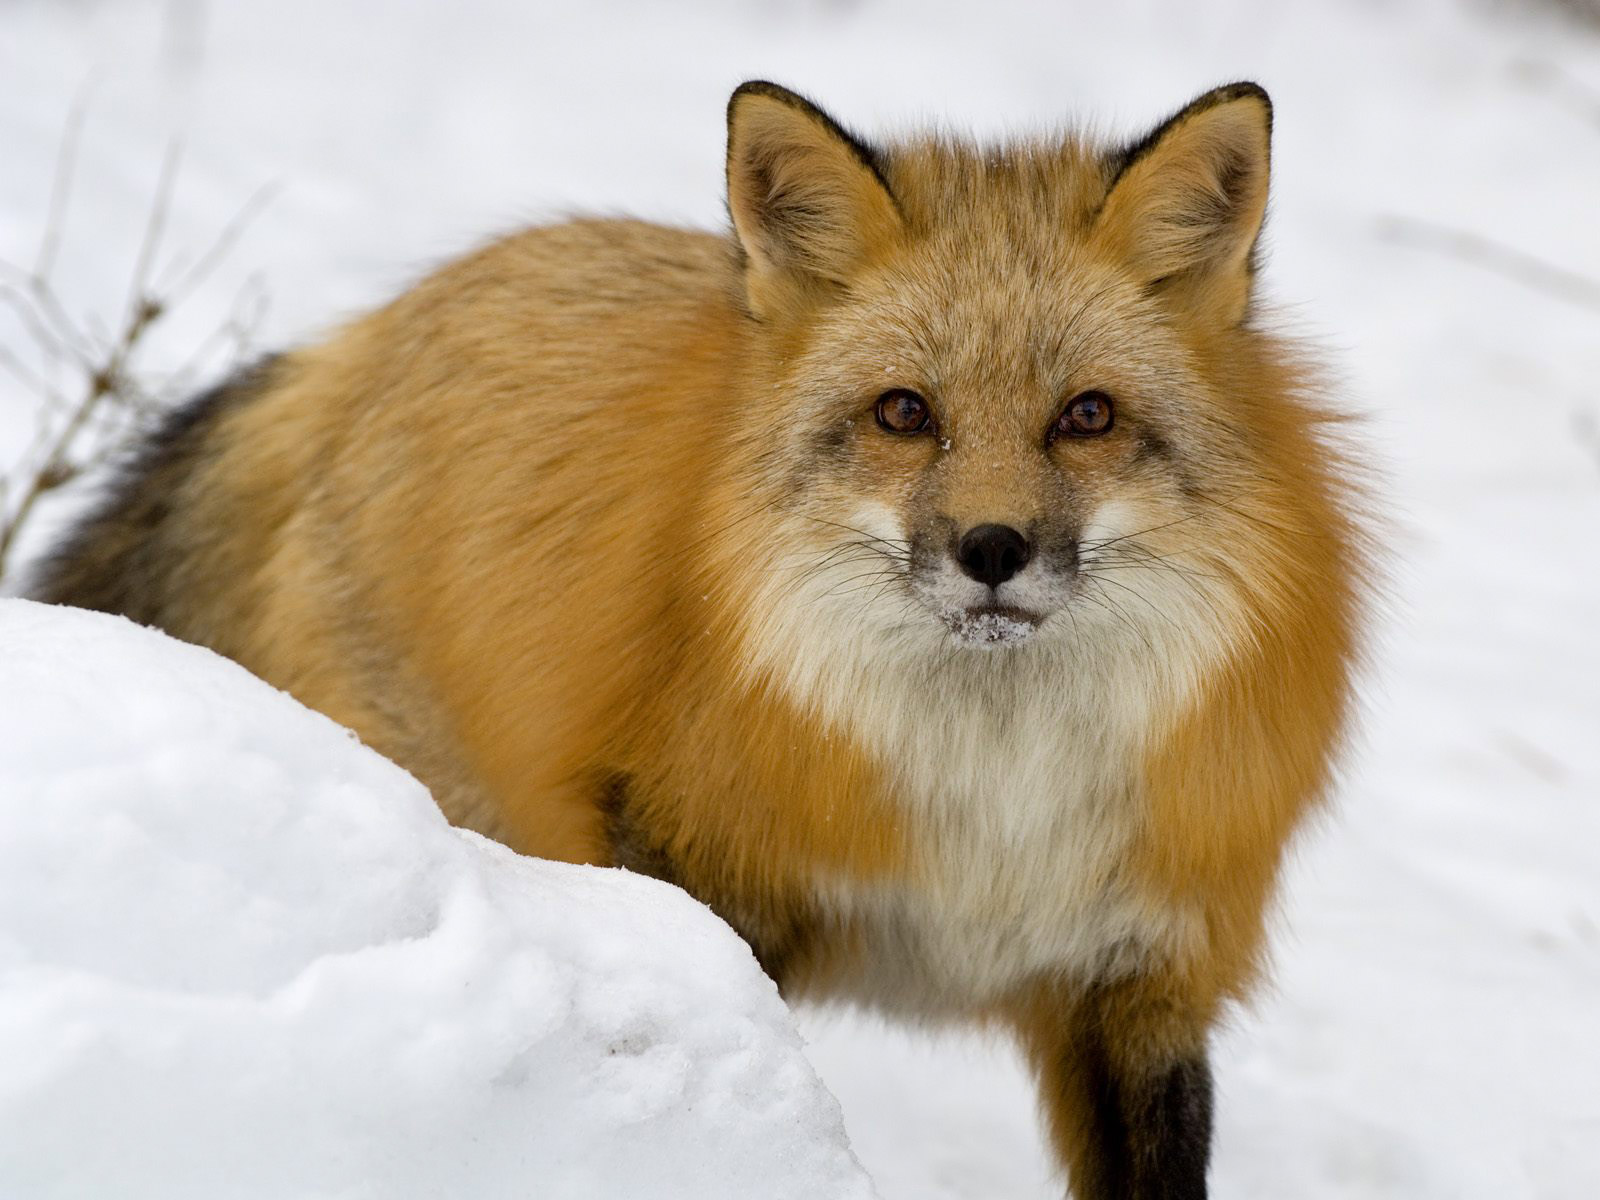 all-about-animal-wildlife-red-fox-photos-images-and-information-2012